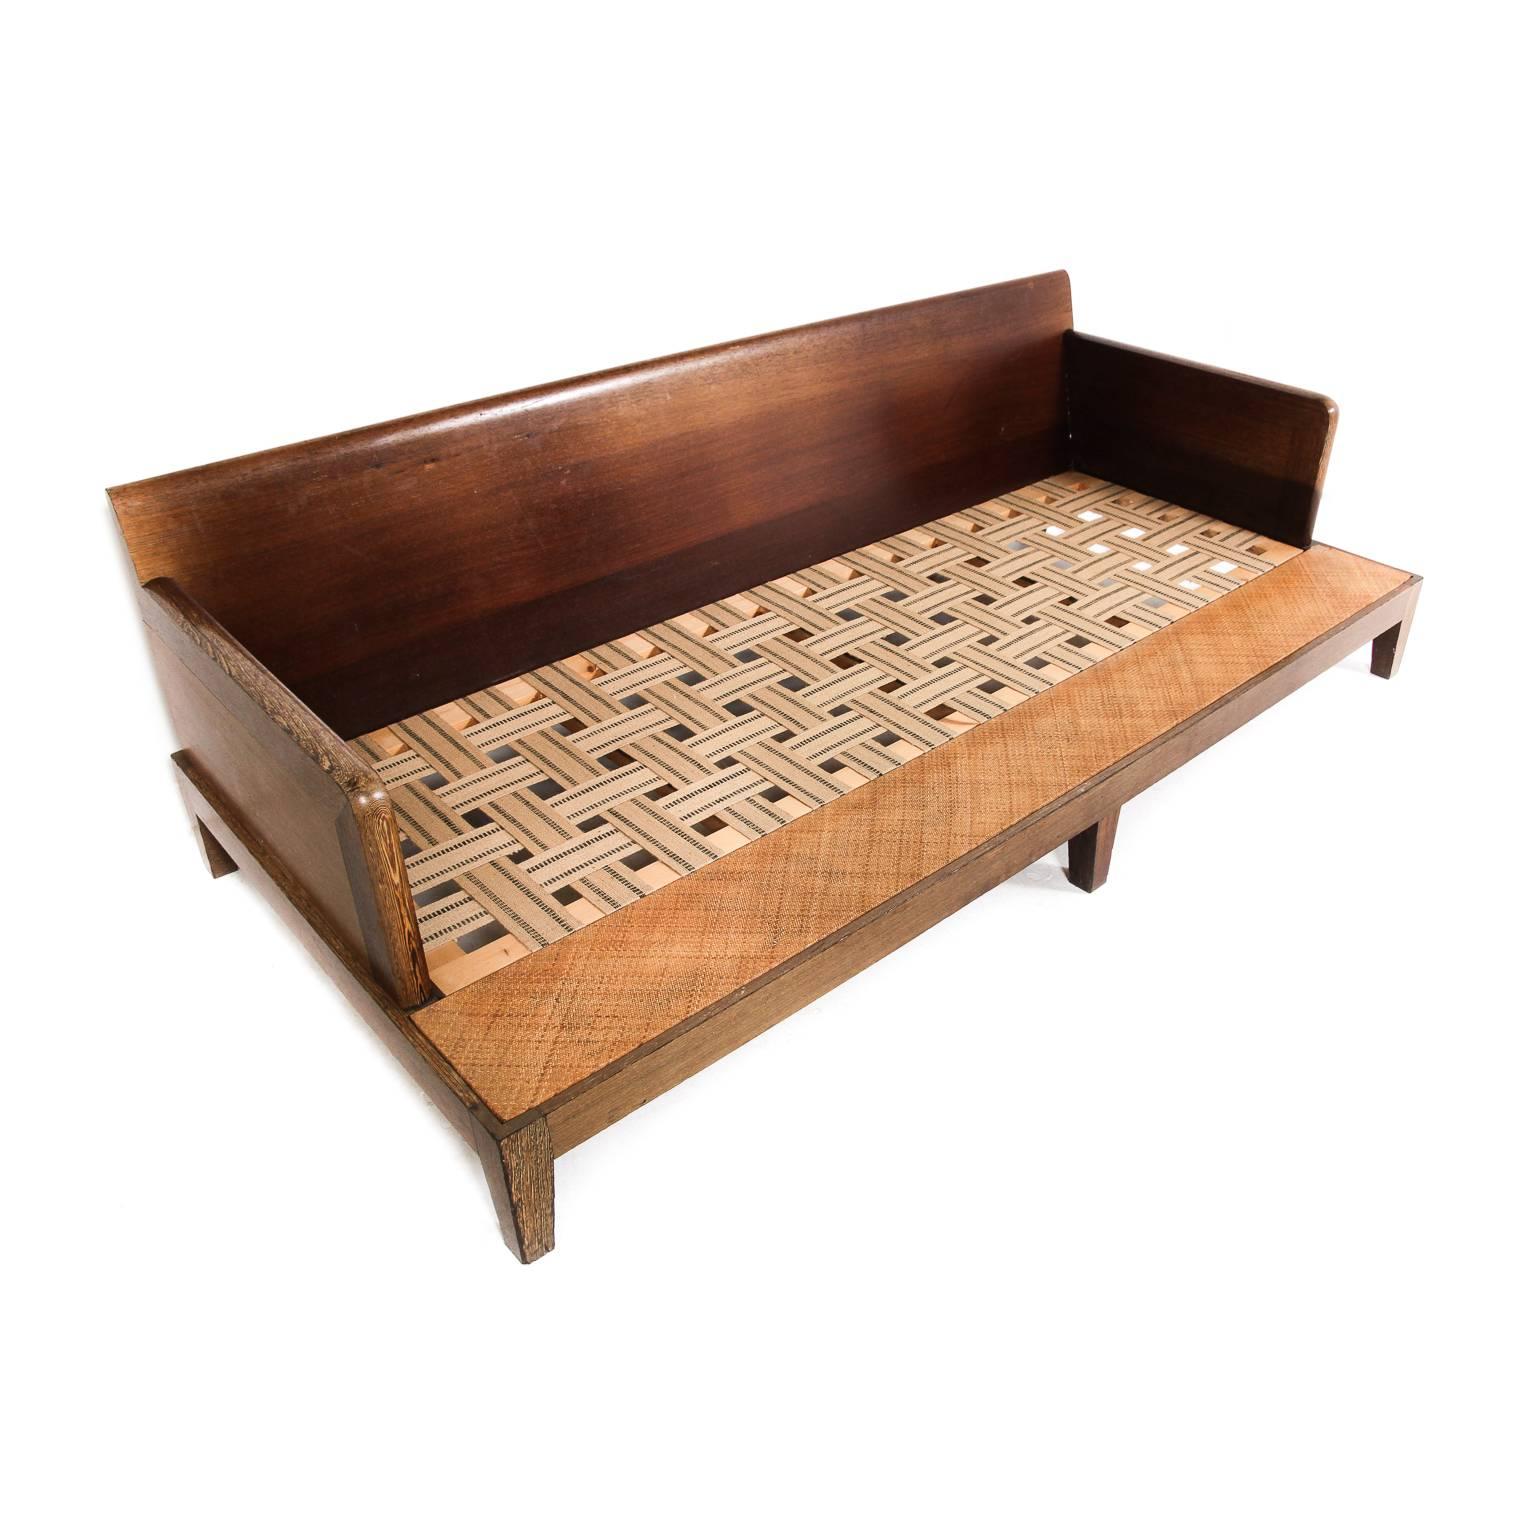 French Vintage Original ‘Opium Bed’ in African Wenge Wood by Christian Liagre, C.1980